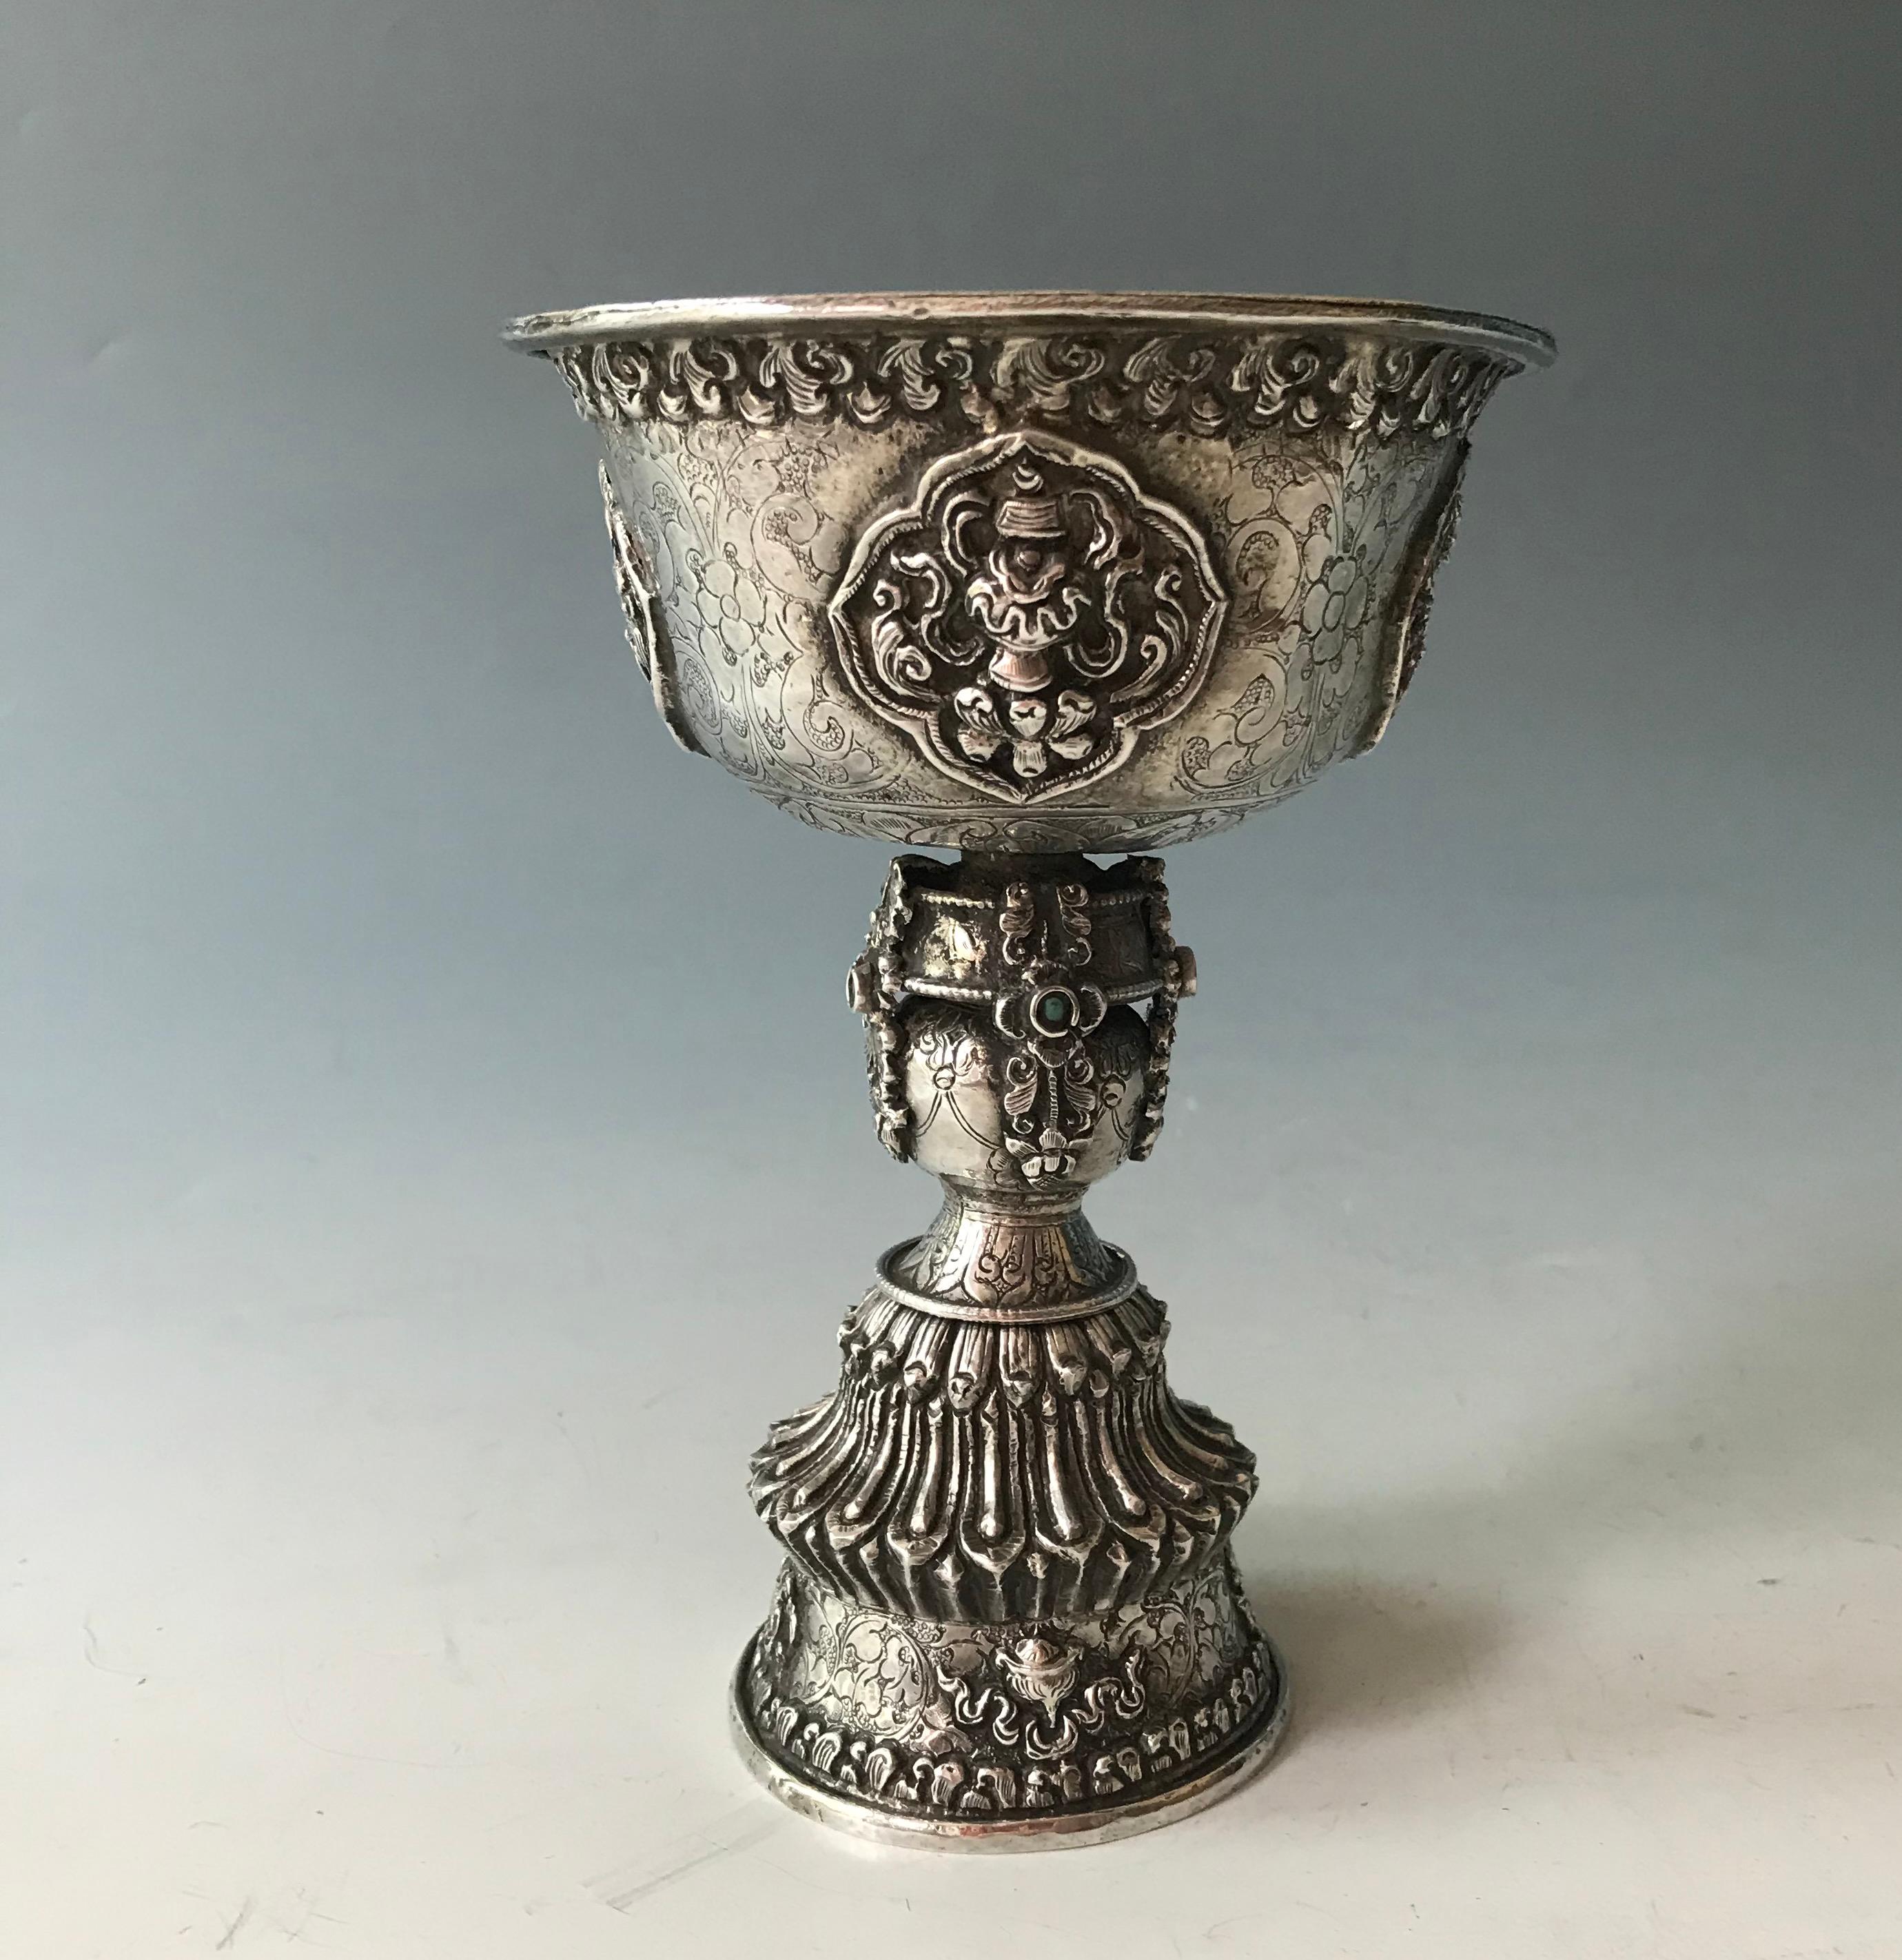 Fine Antique Tibetan ritual silver butter oil lamp.
The Yak butter Oil lamp used in Tibetan rituals 
Very finely made in high grade silver with hammered chased and repoussé Buddhist designs all over. 
Height 6 1/2 x 4 1/2 inches , 16 x 11